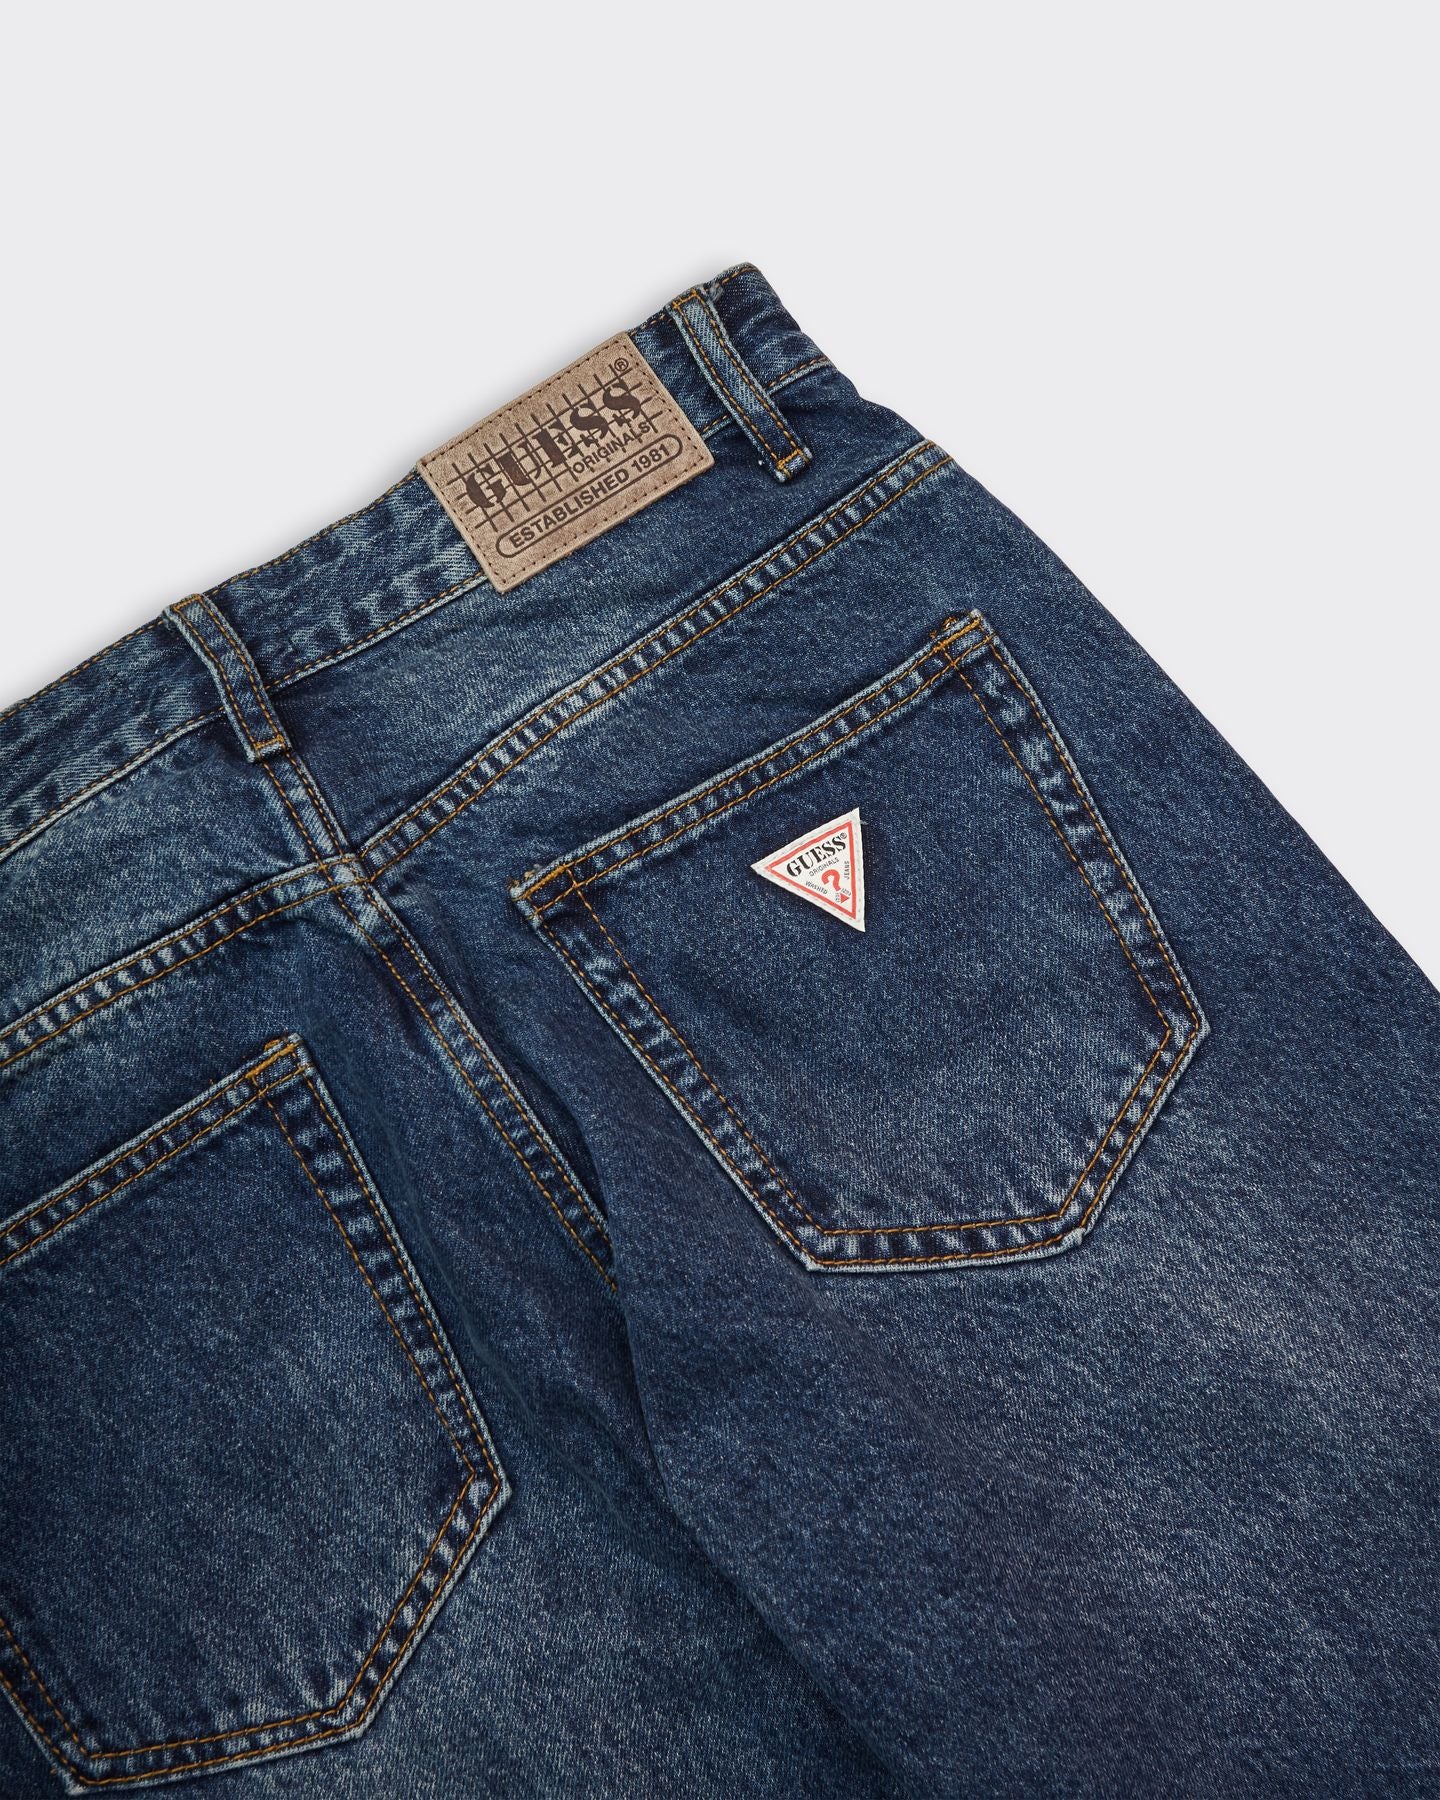 Relaxed  Go Kit Dark Wash Jeans